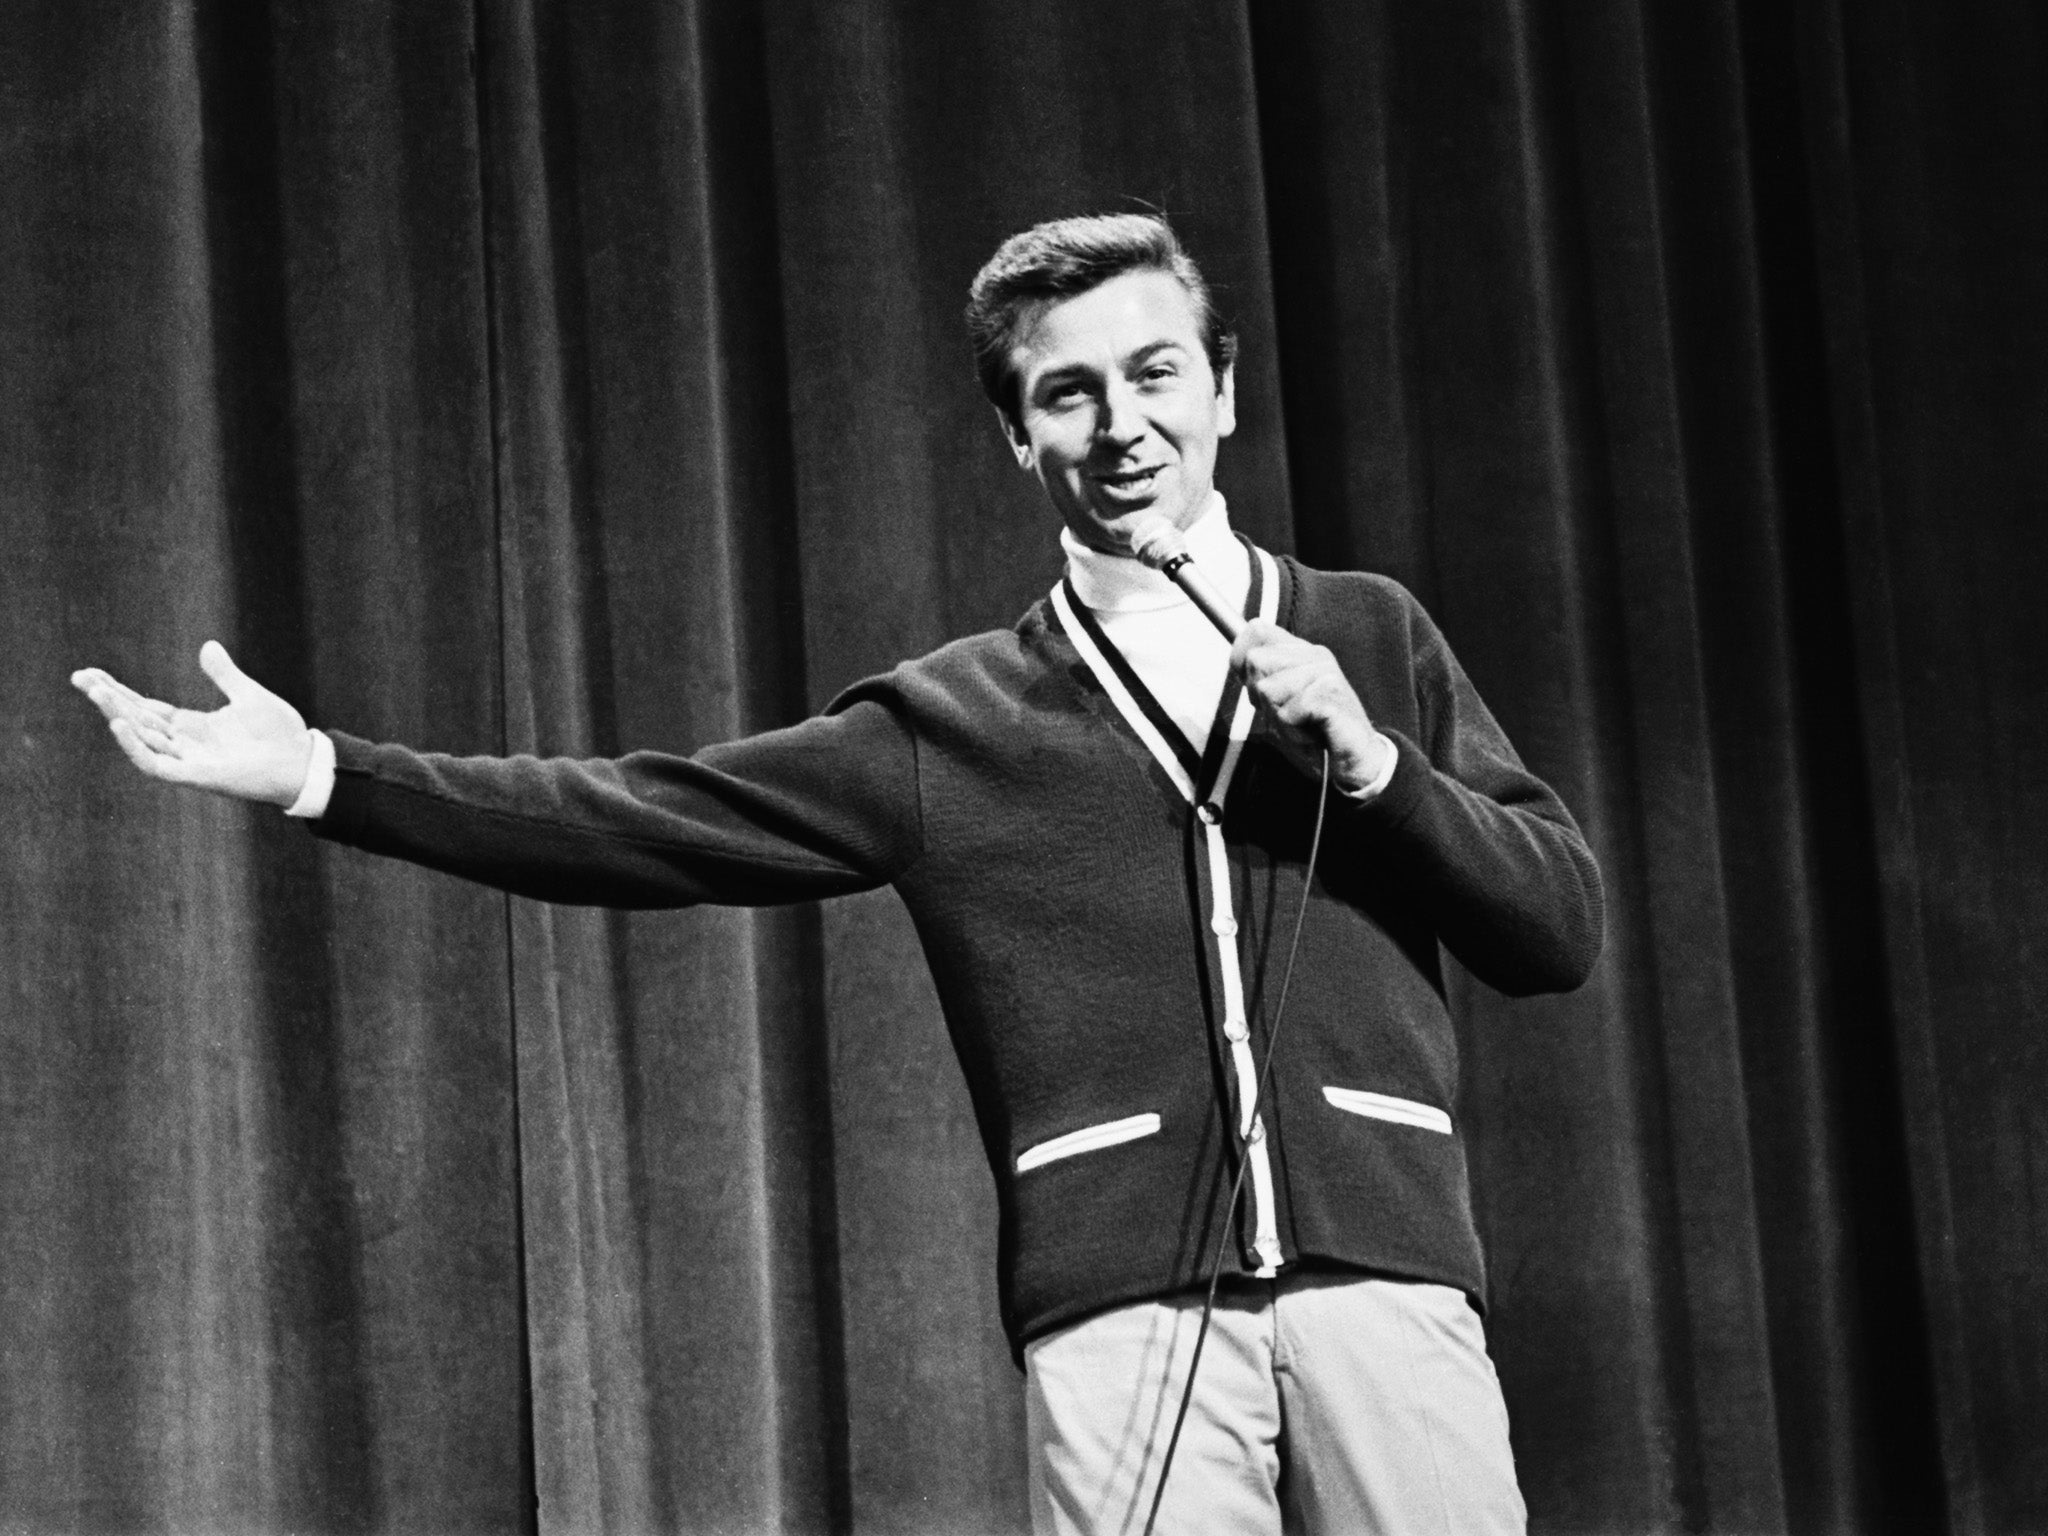 Des O’Connor on stage at the Royal Variety Show in 1966